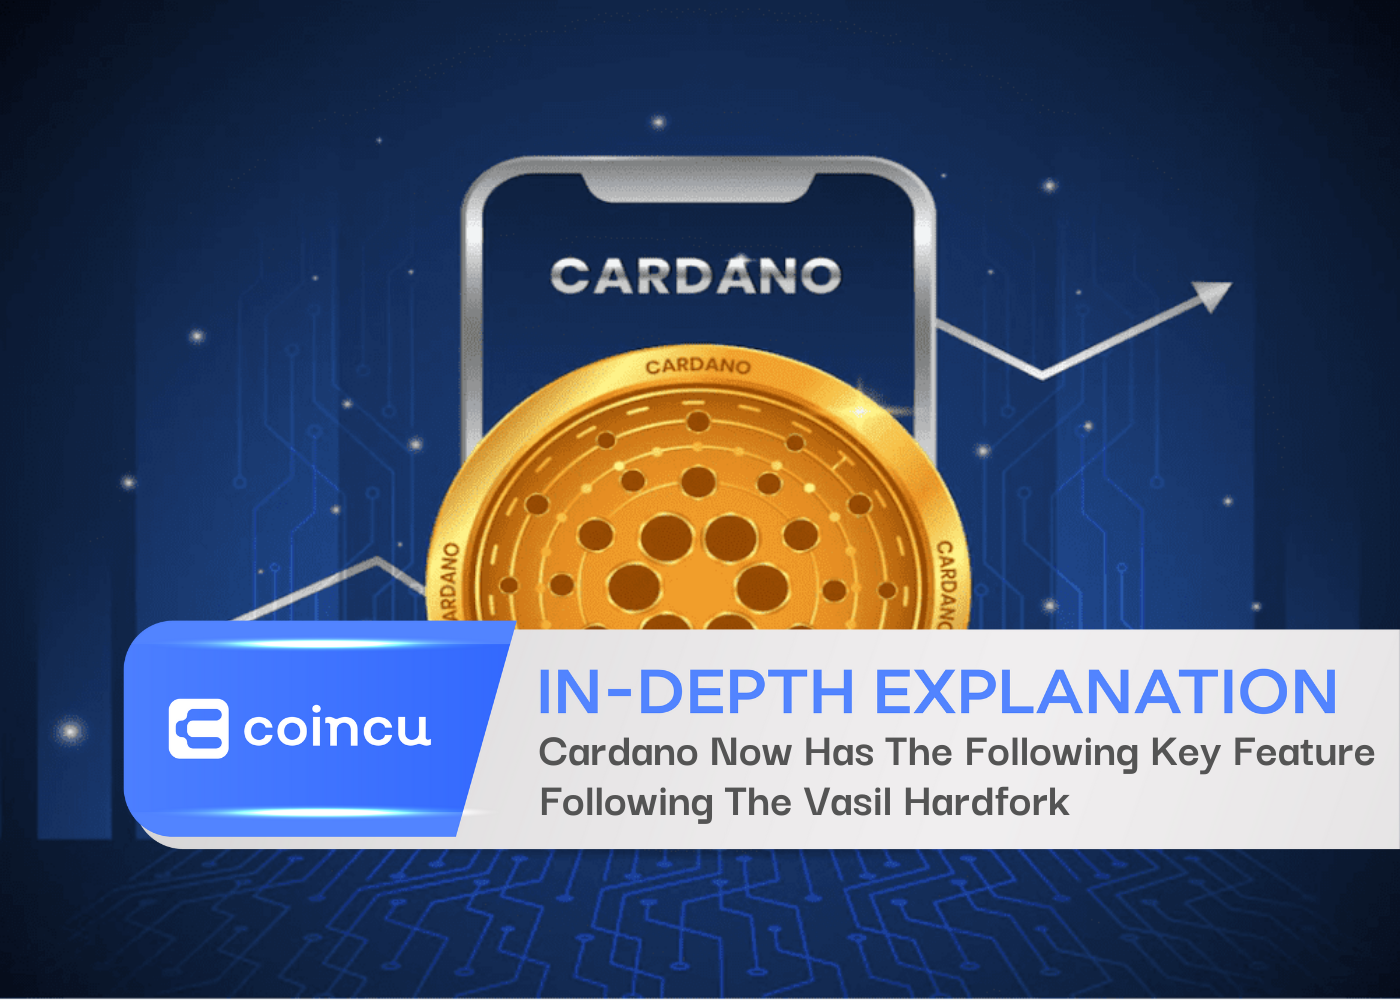 Cardano Now Has The Following Key Feature